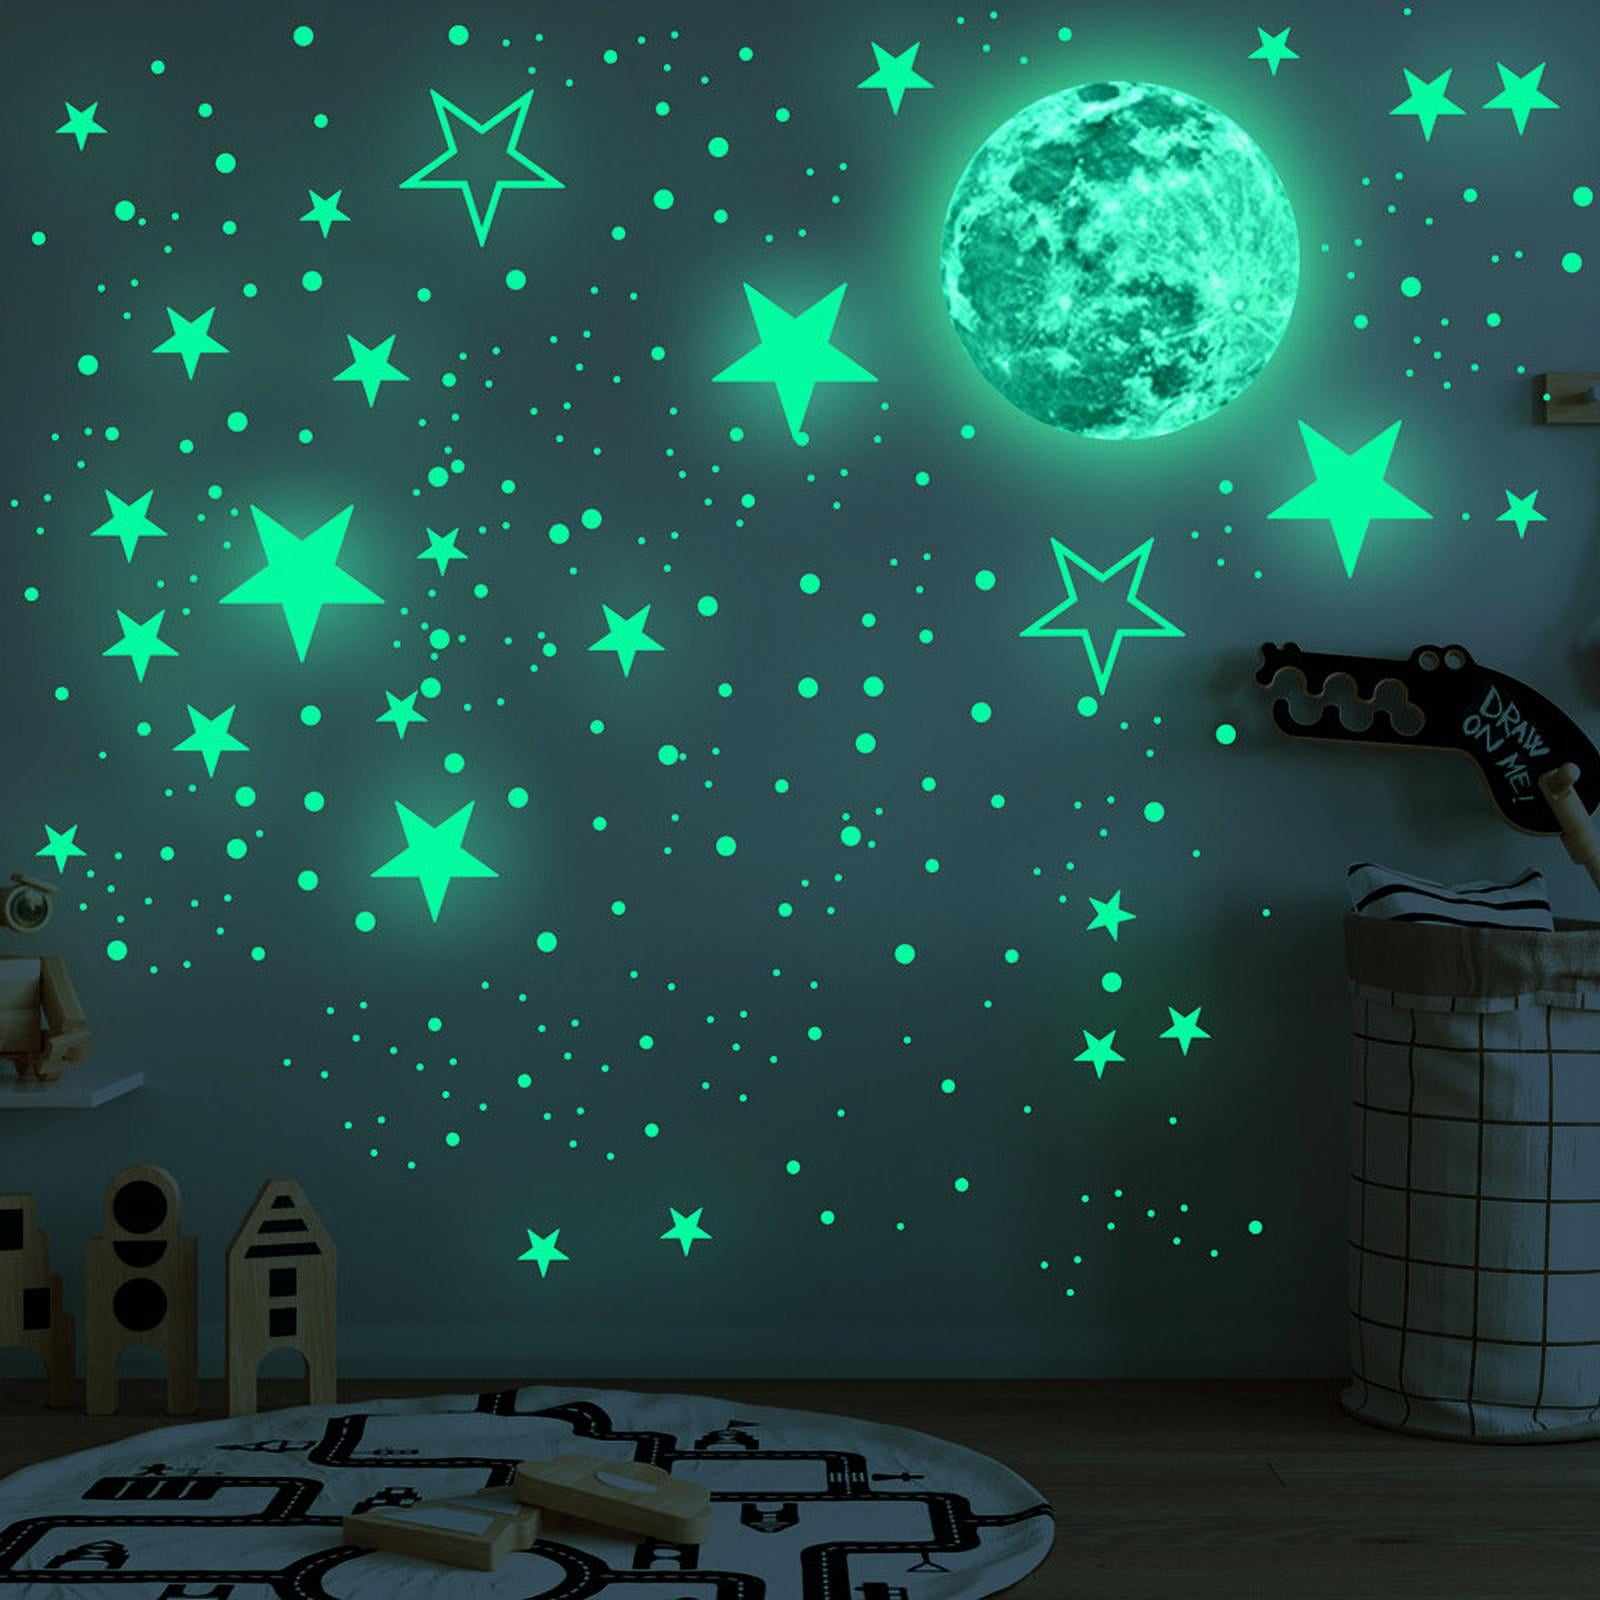 Honeyjoy 260 Pcs Glow in The Dark Stars, Glowing Stars for Ceiling, Star Wall Decals Solar System Space Galaxy Planets Wall Stickers for Kids, Girls